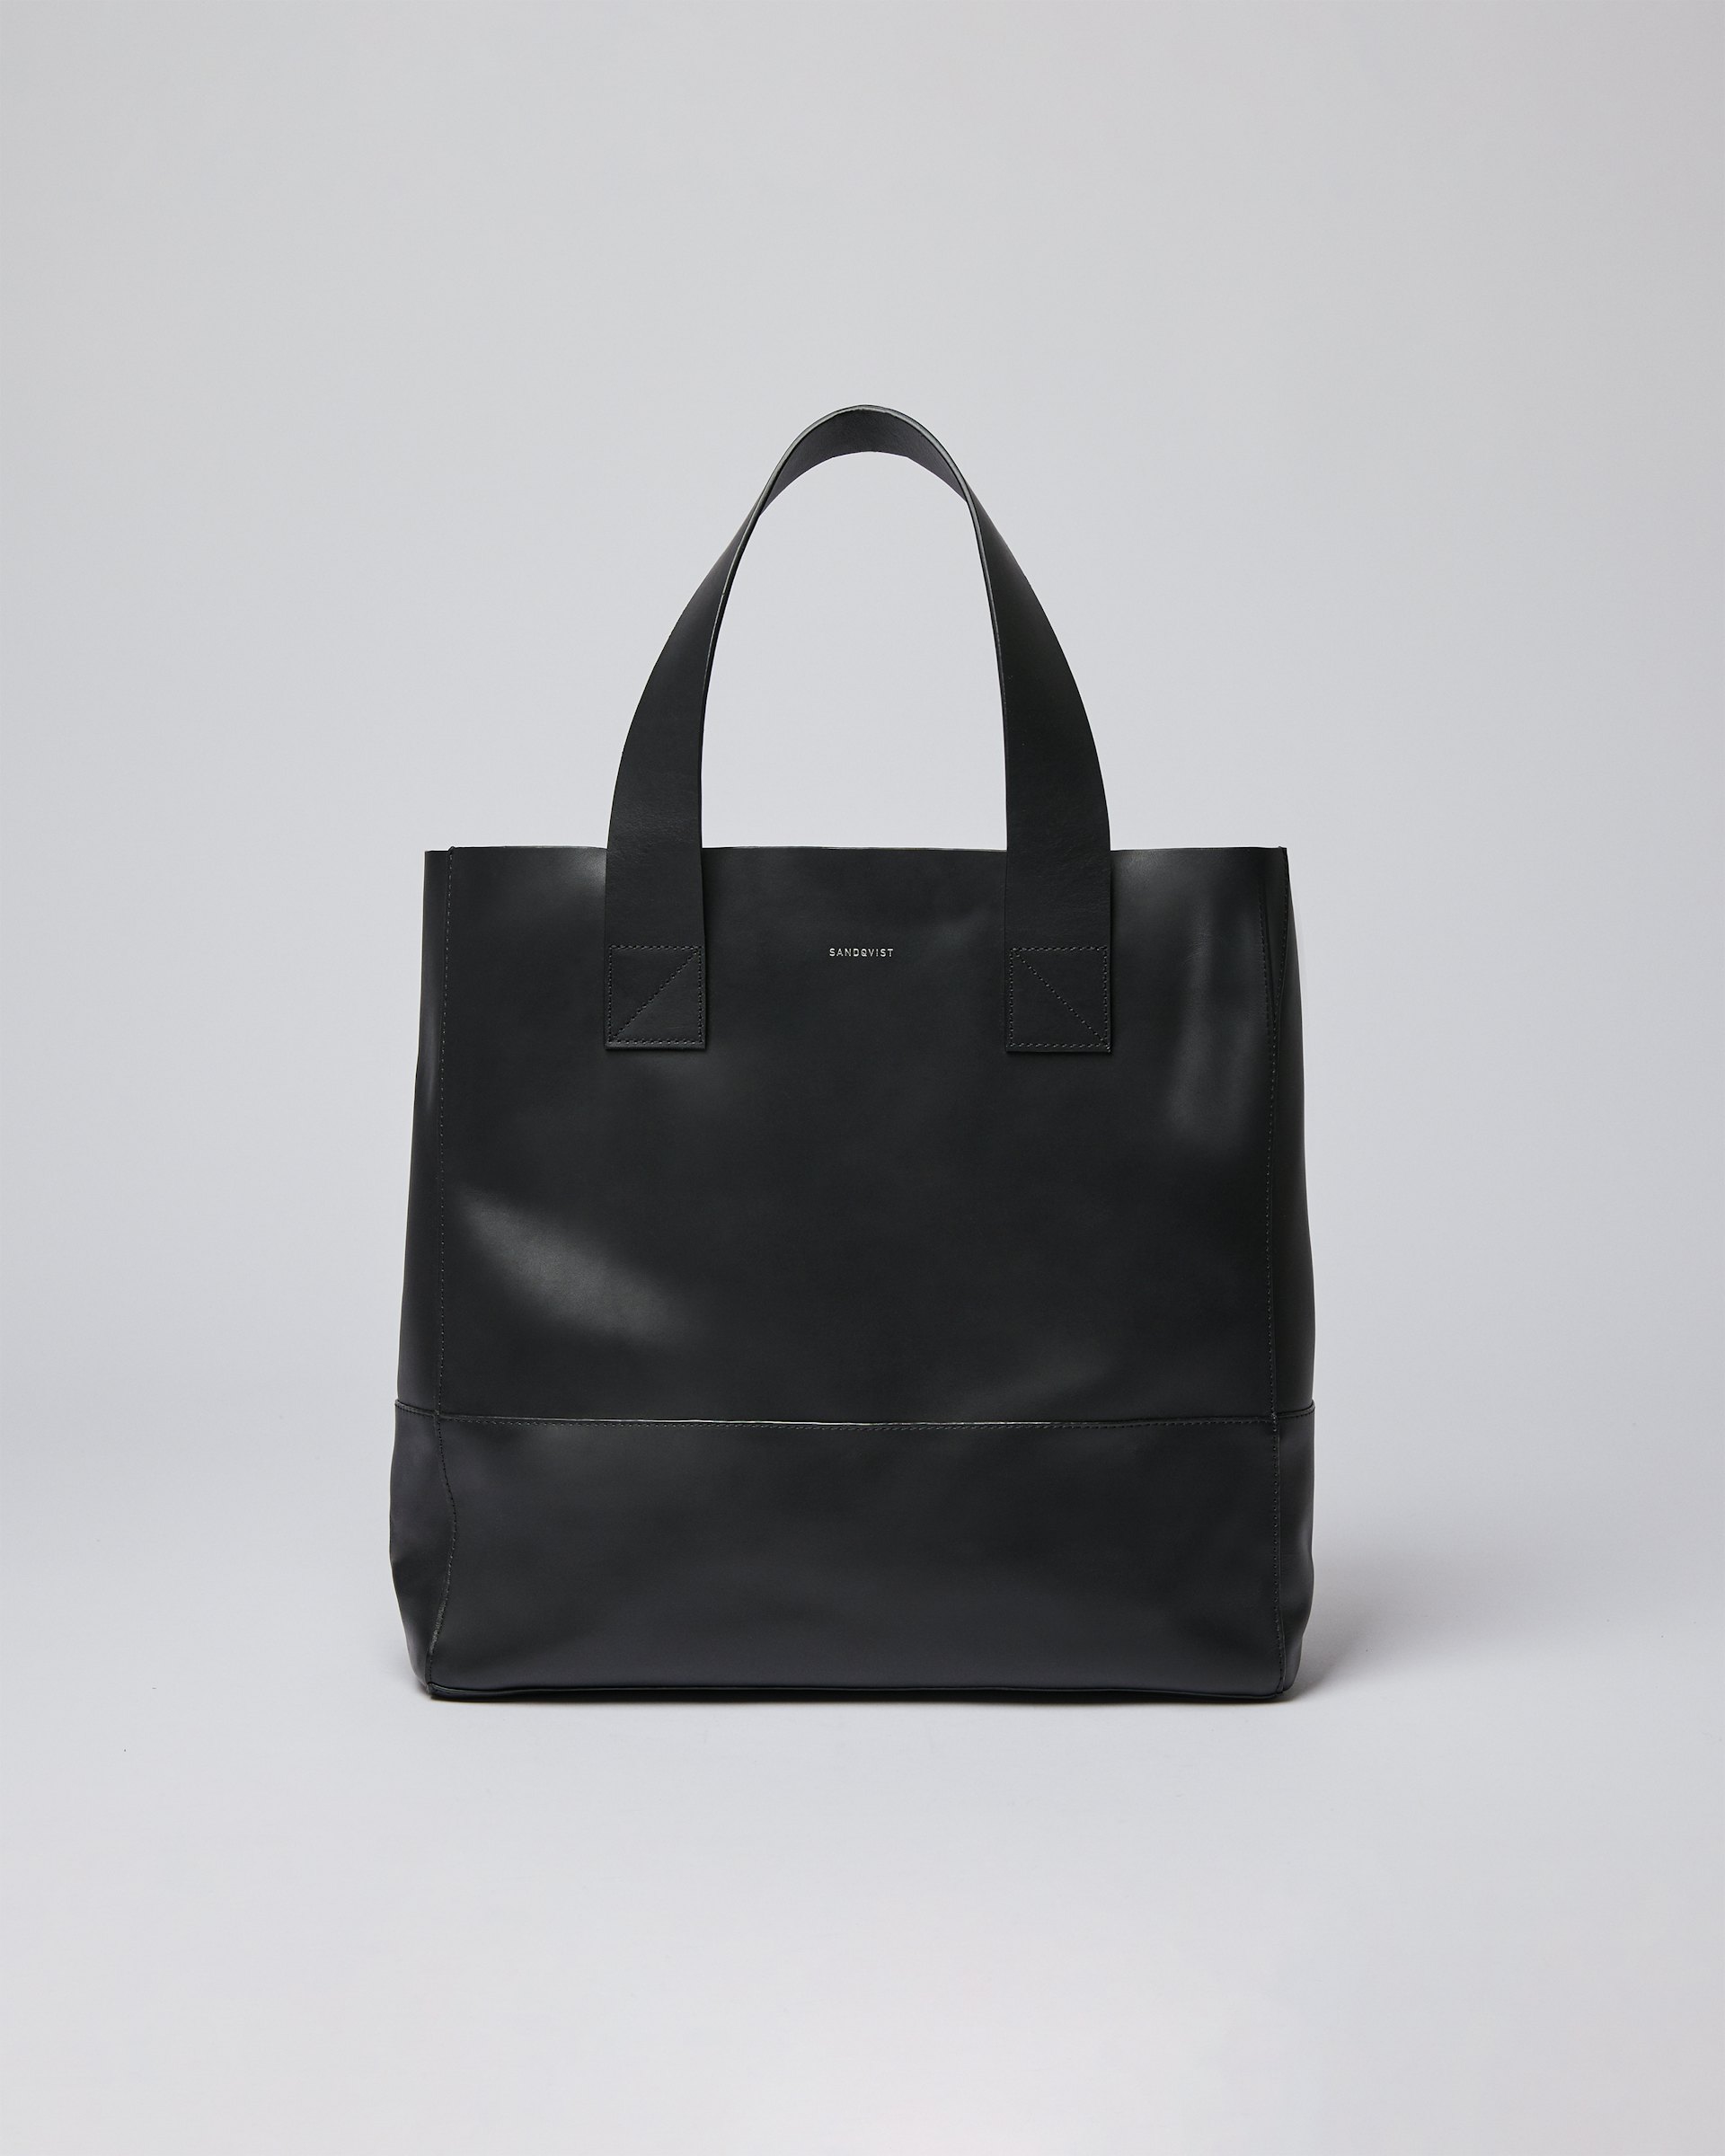 Iris belongs to the category Shoulder bags and is in color black (1 of 6)